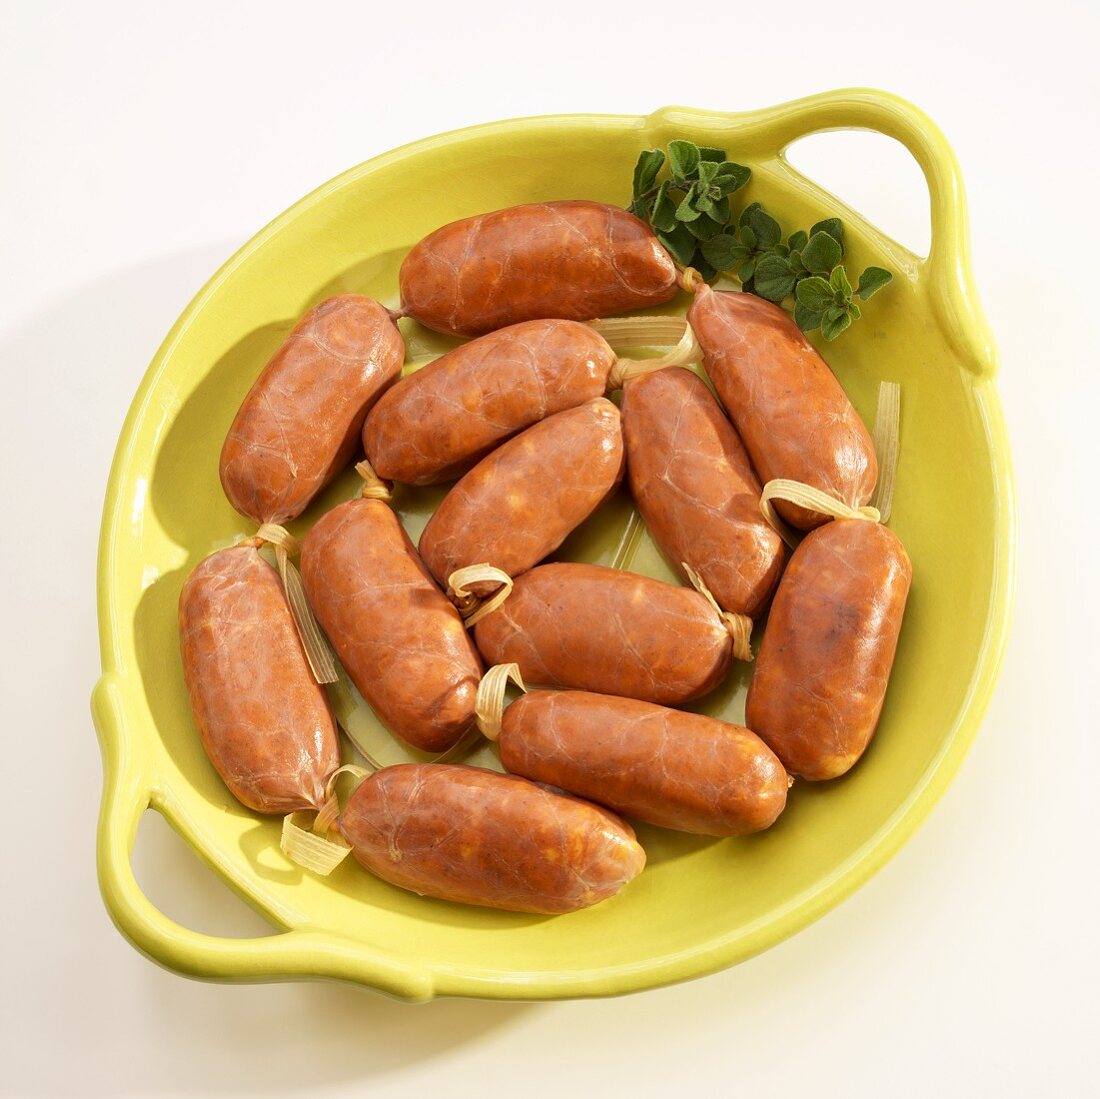 Uncooked Chorizo Links in a Yellow Dish; White Background